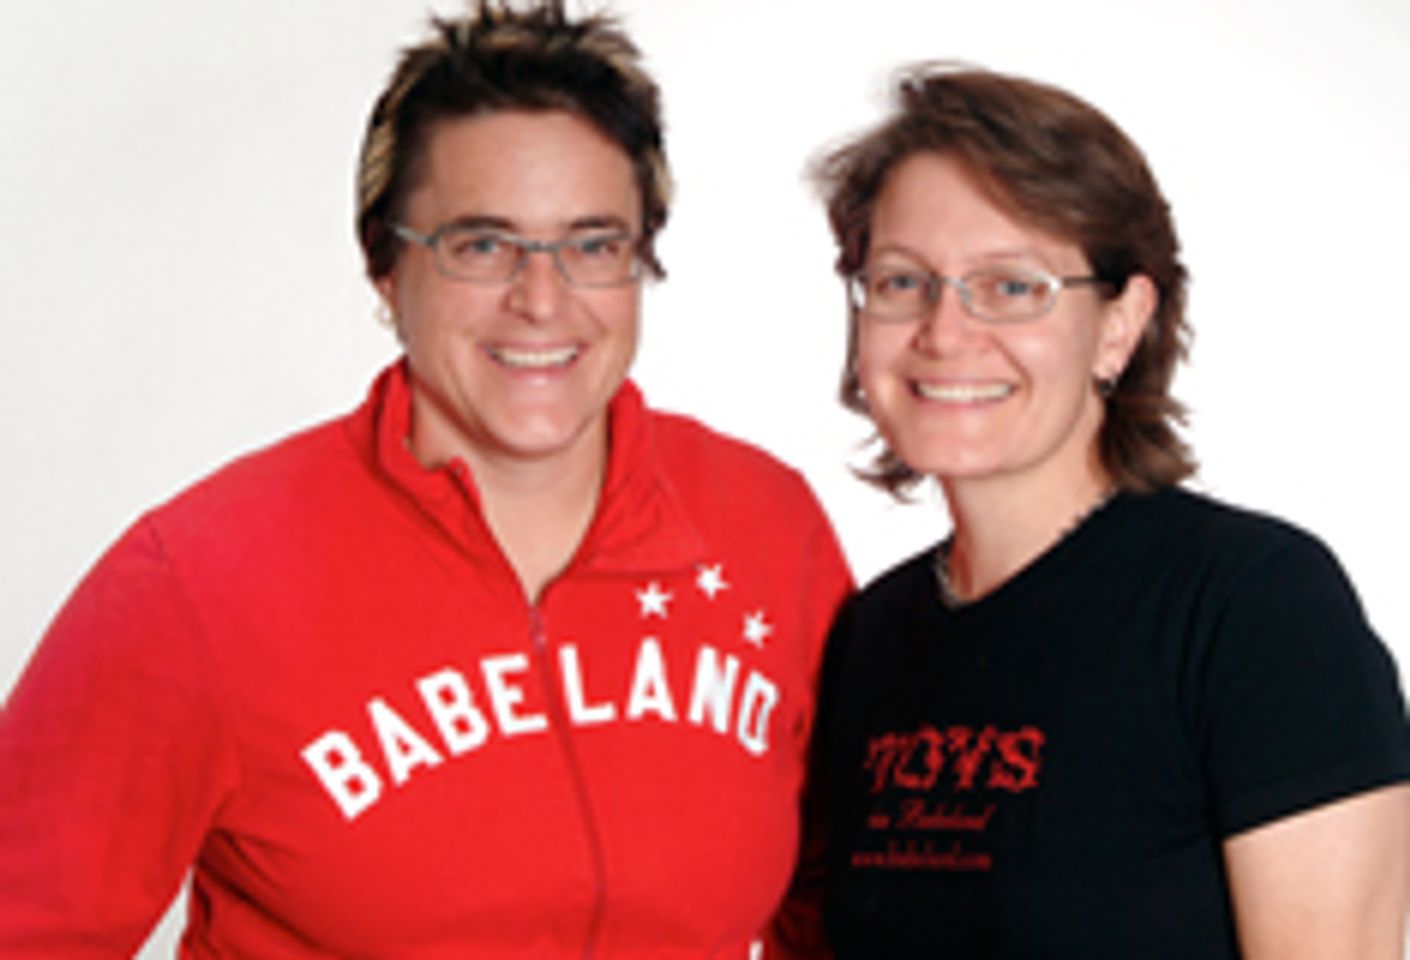 Babeland to Open Fifth Store at 15th Anniversary